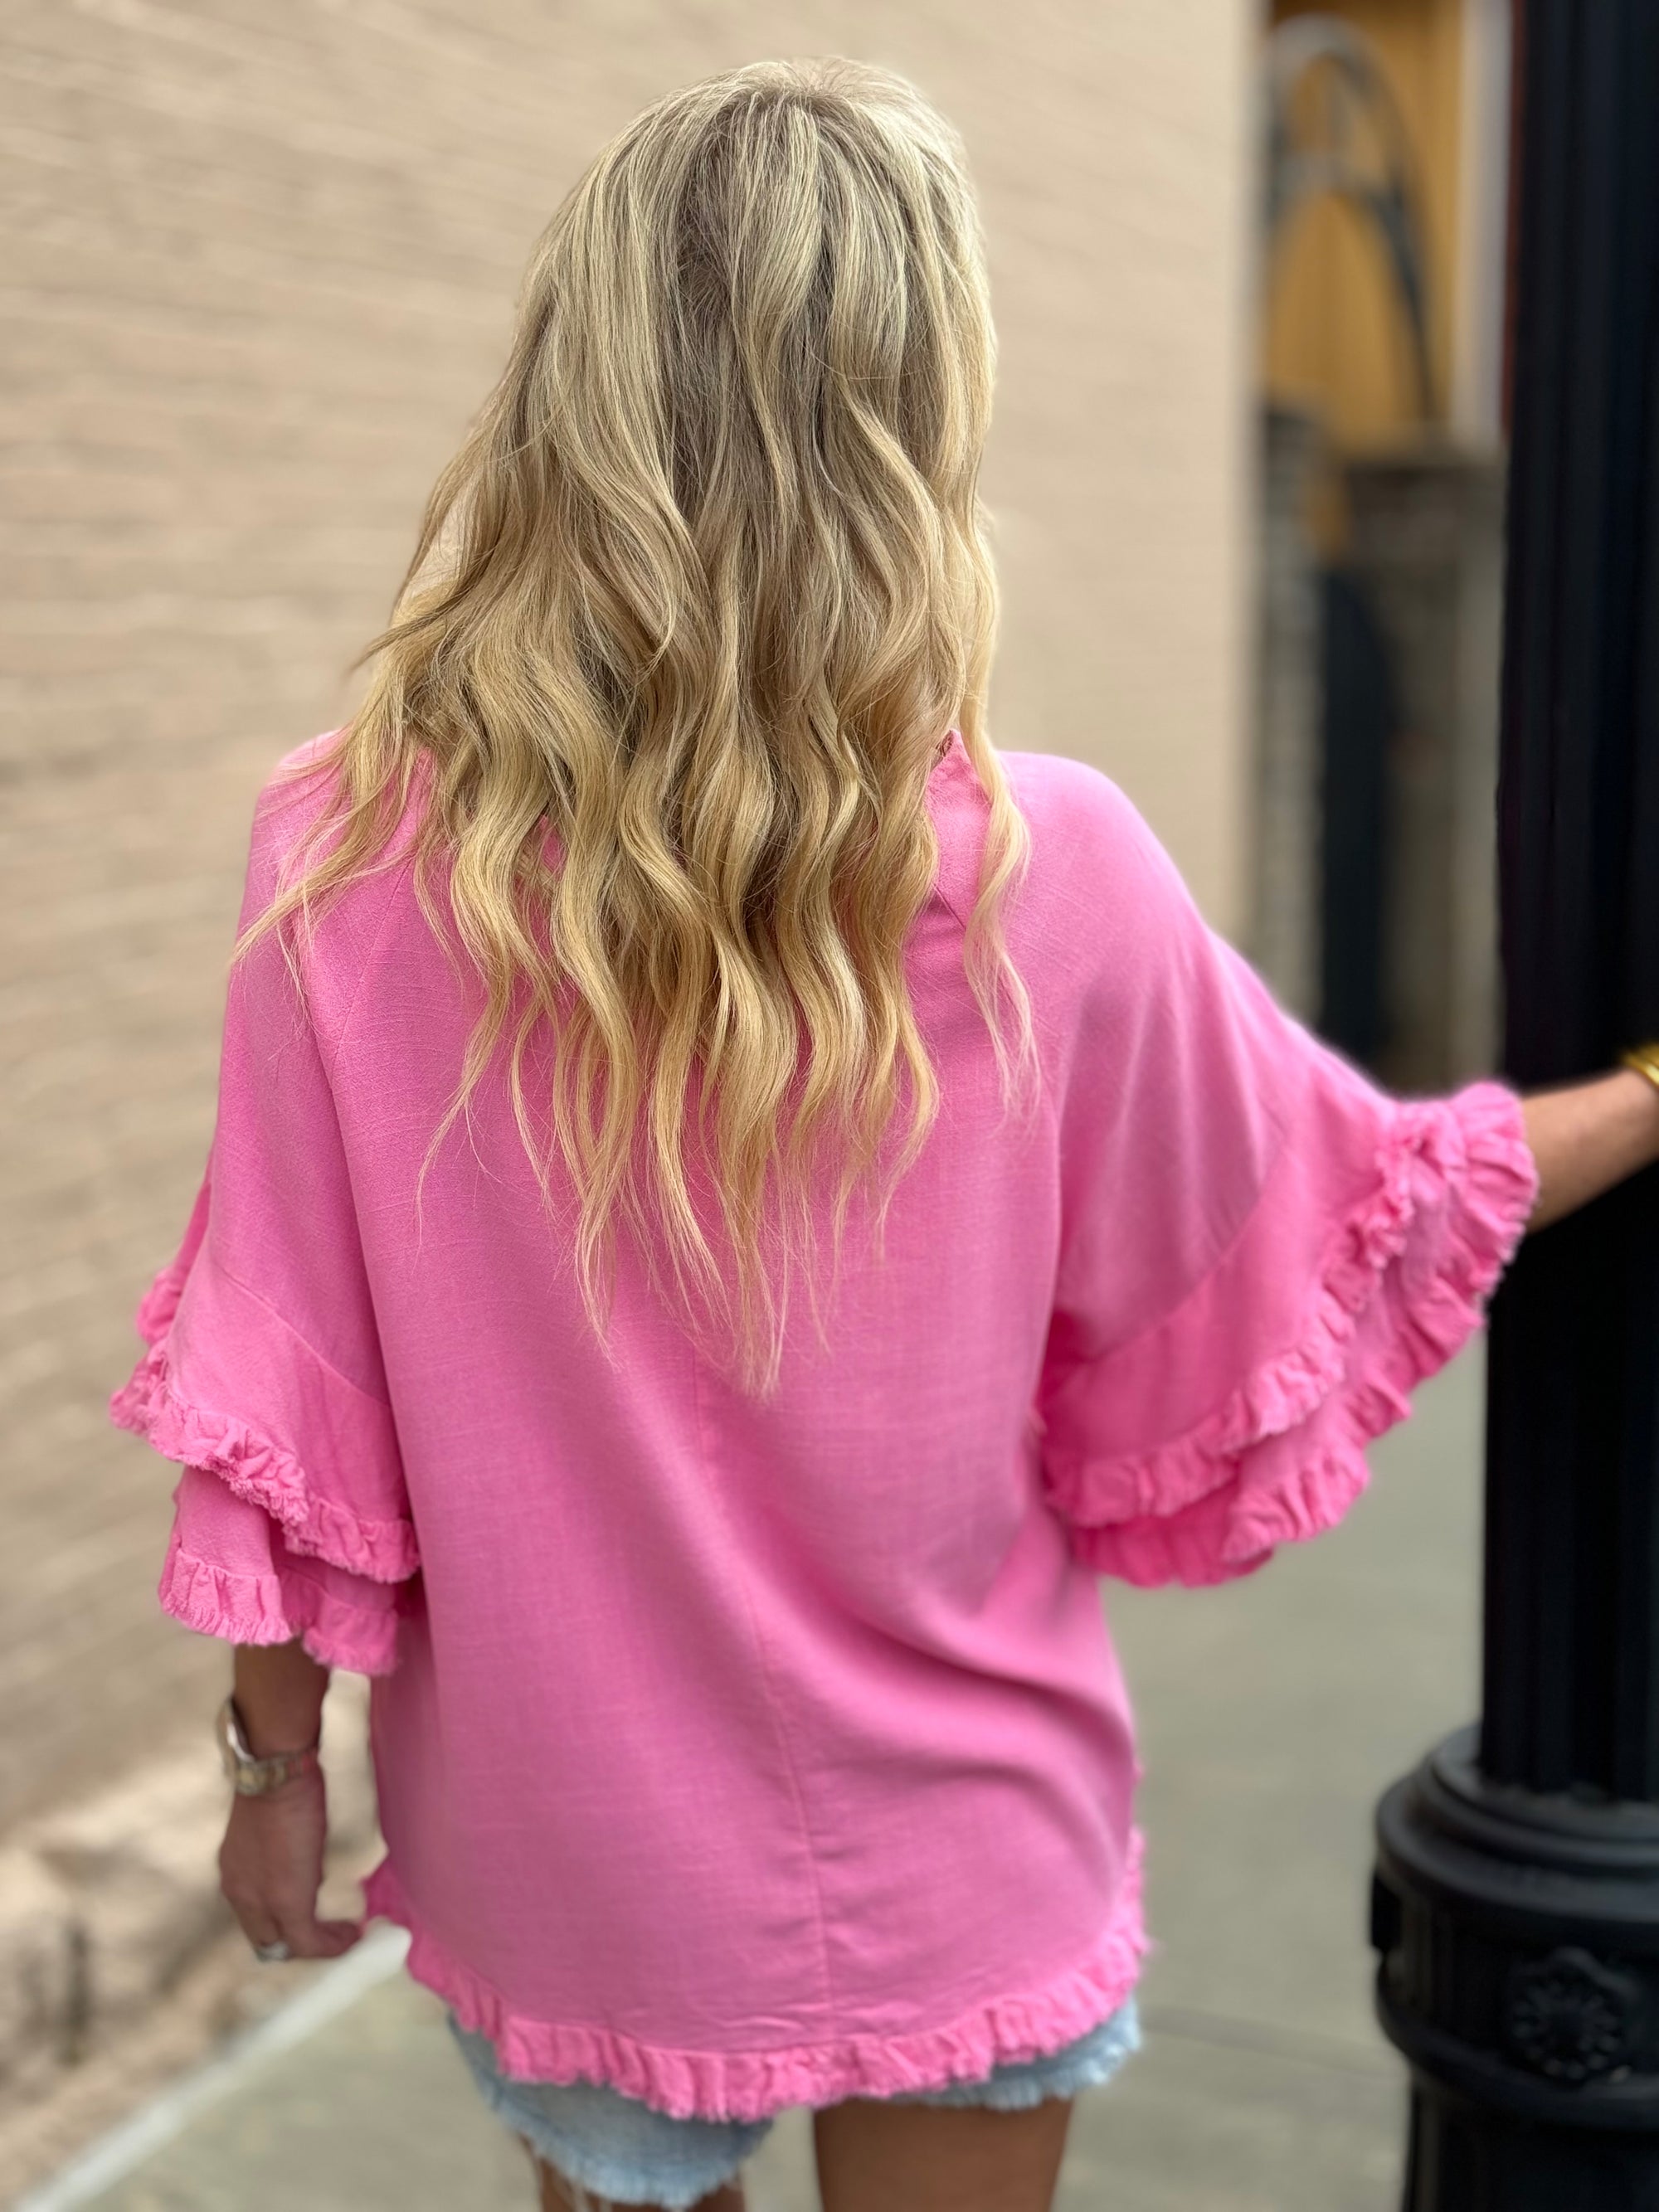 Frayed Edge Linen Top in Pink